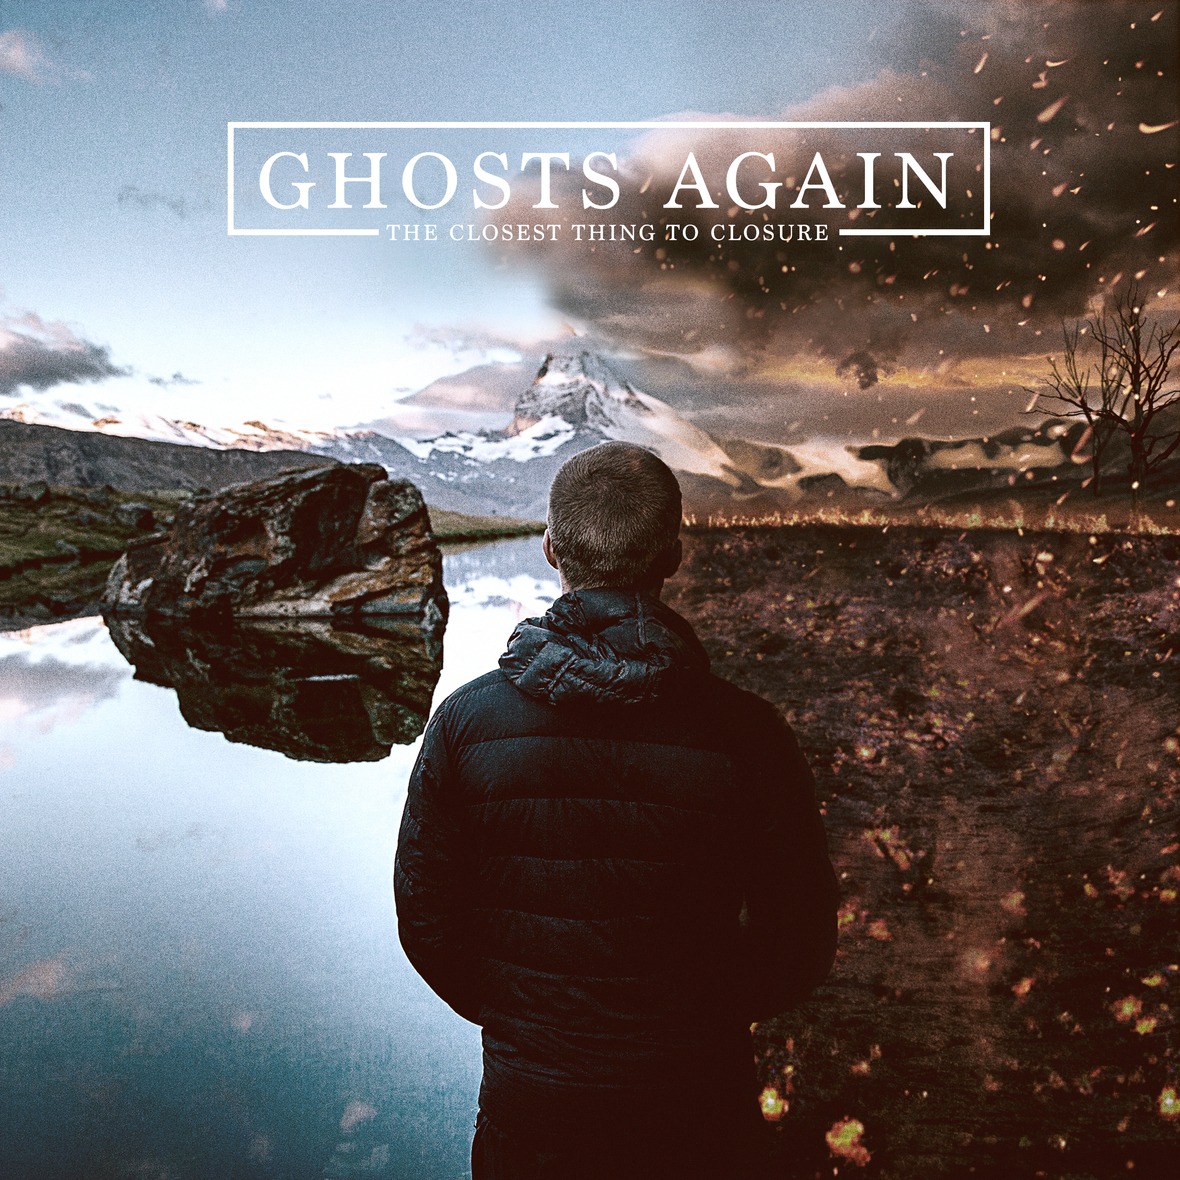 Ghosts Again Announce "The Closest Thing To Closure" EP, Release New Single